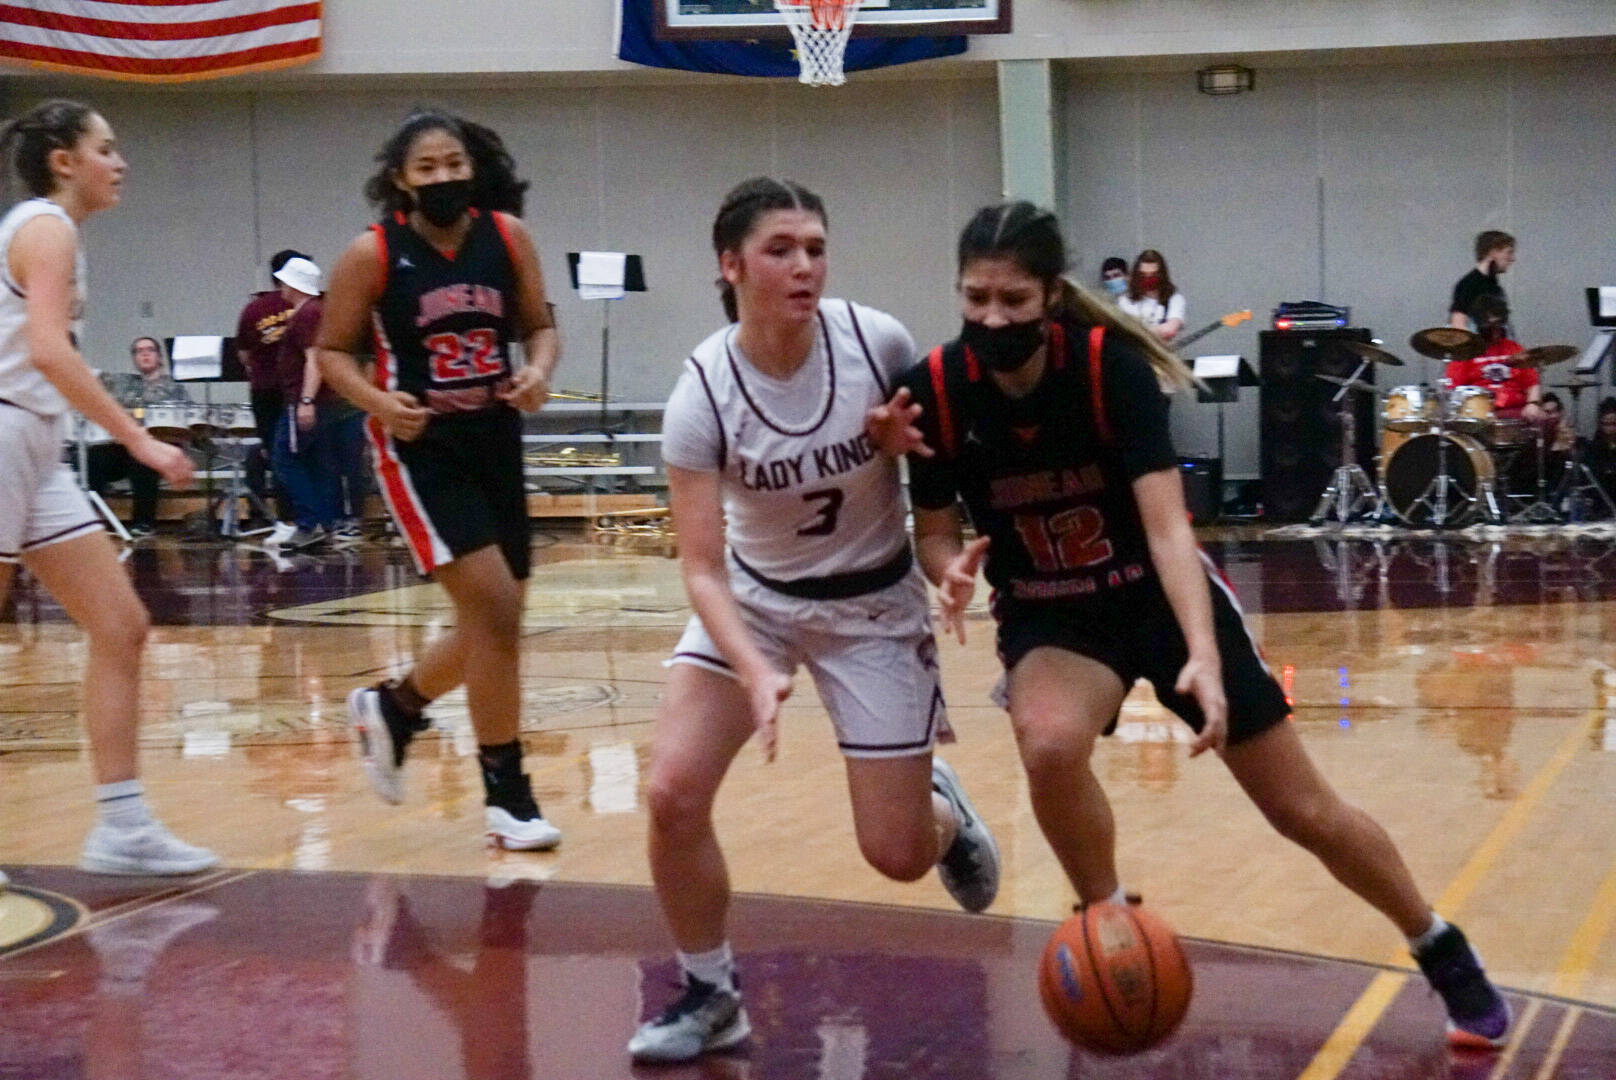 JDHS’ Trinity Jackson (12), a senior, dribbles while defended by KHS’ Paige Boehlert (3), a senior, during the Region V 4A championship game. Ketchikan High School won the tournament, securing an automatic berth in the state tournament. Juneau-Douglas High School: Yadaa.at Kalé will find out Sunday if they will be heading to state, too. (Courtesy Photo / Jeff Lund)